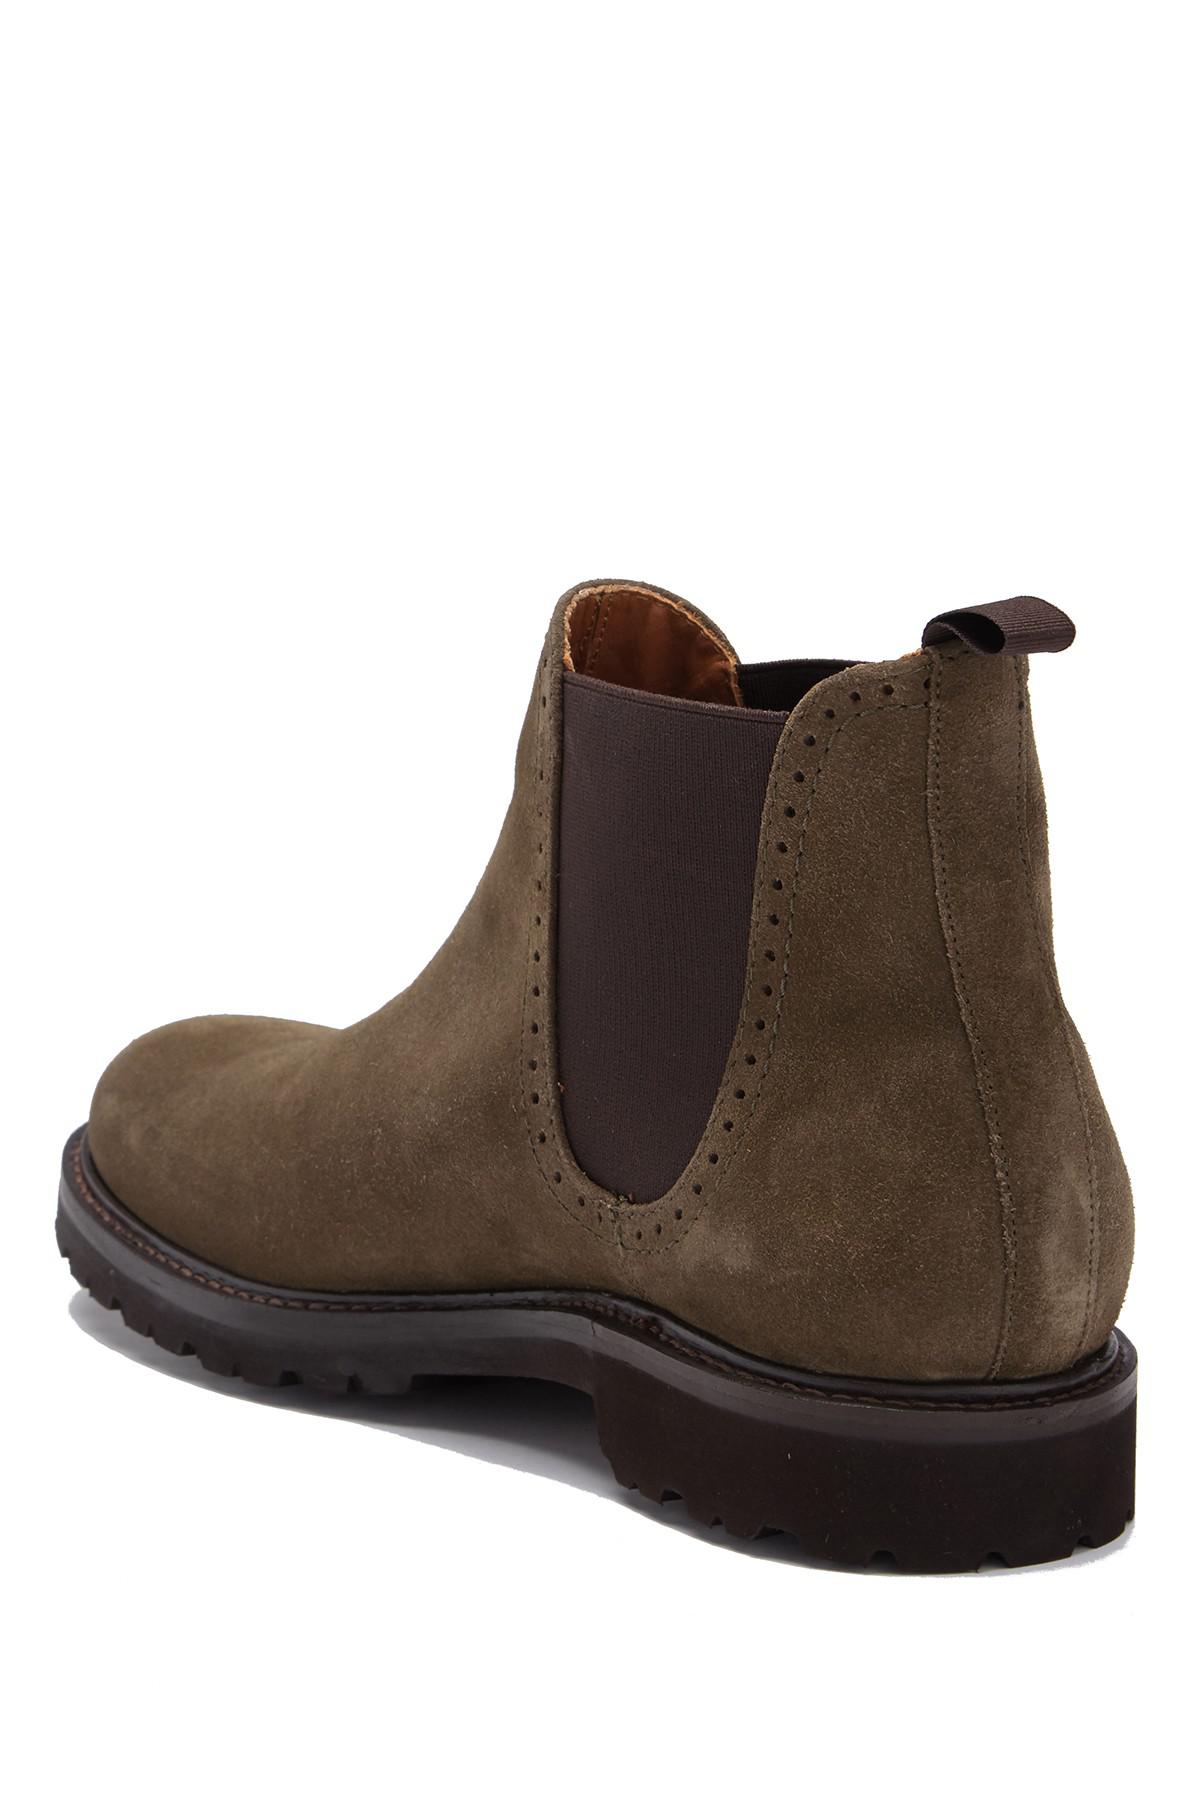 wolverine cromwell boot